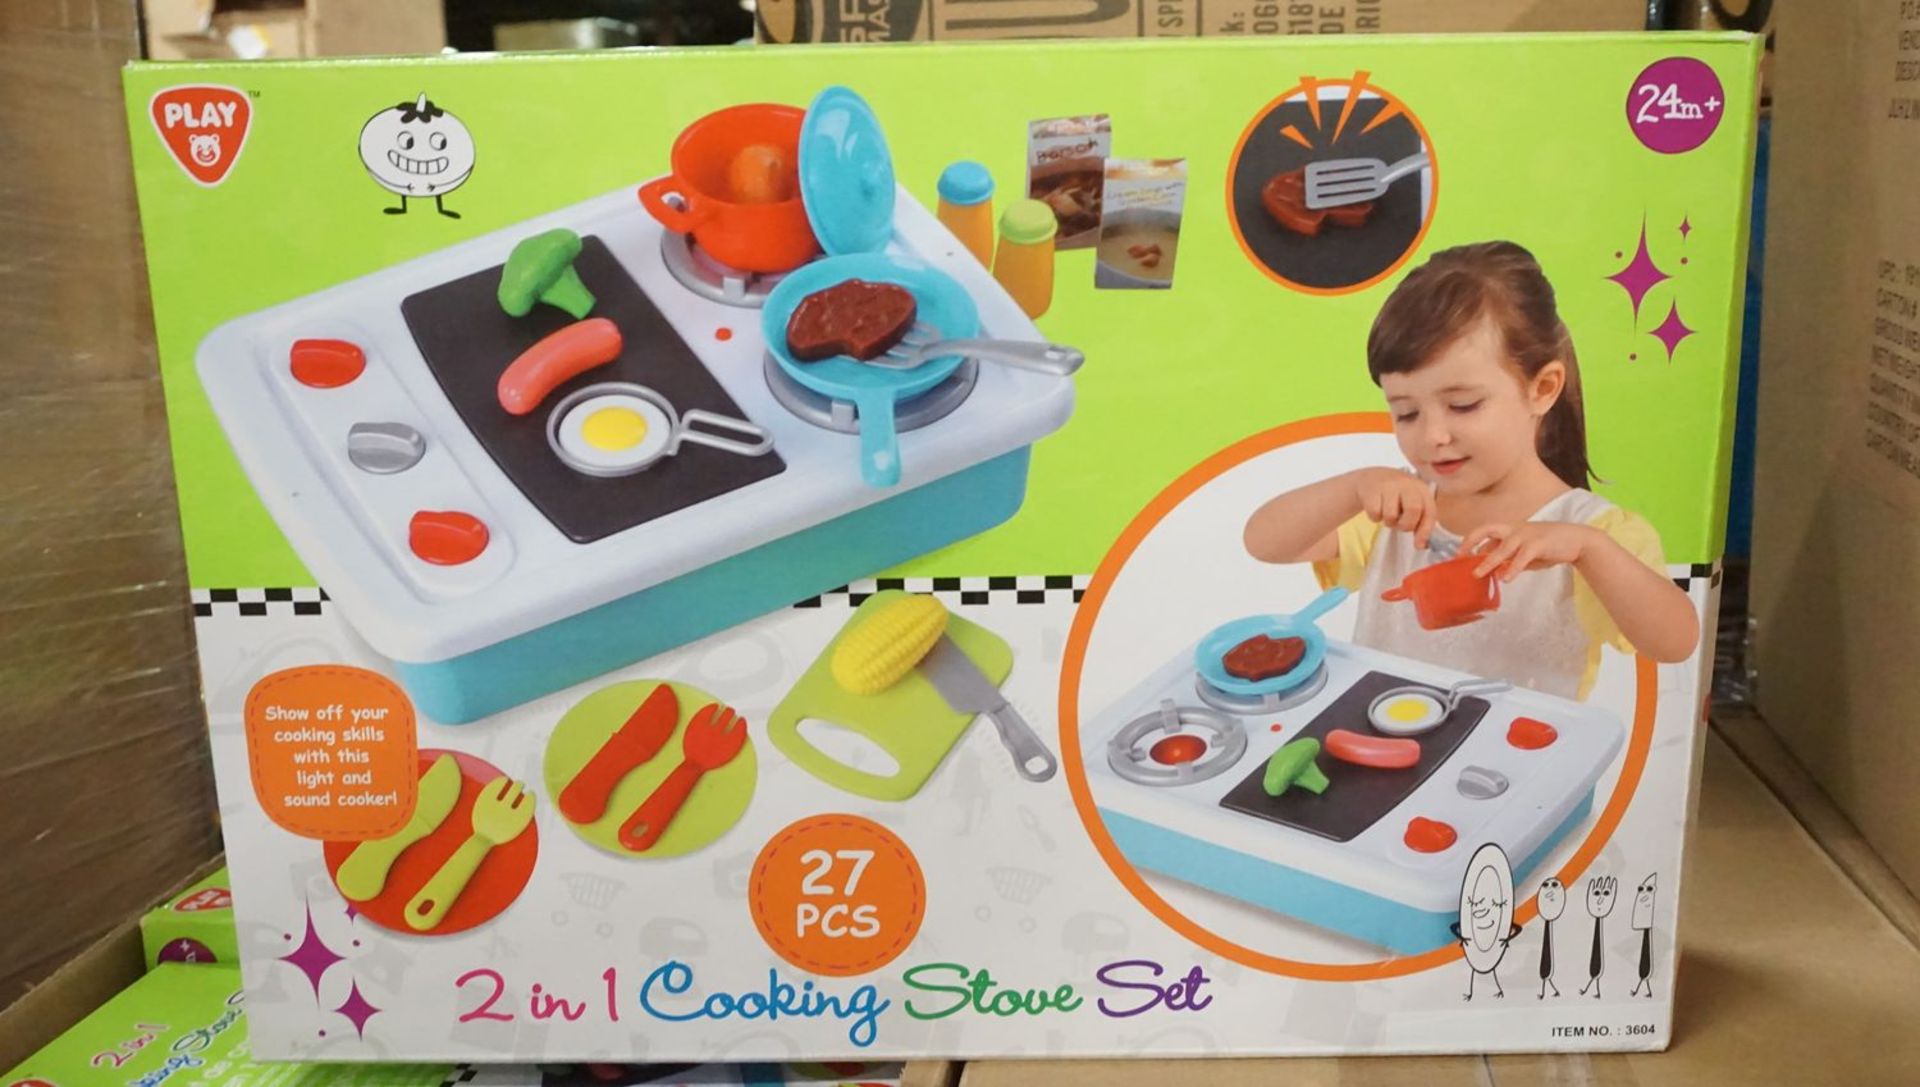 BOXES - PLAY 2-IN-1 COOKING STOVE SETS (4 PCS/BOX) - Image 2 of 2